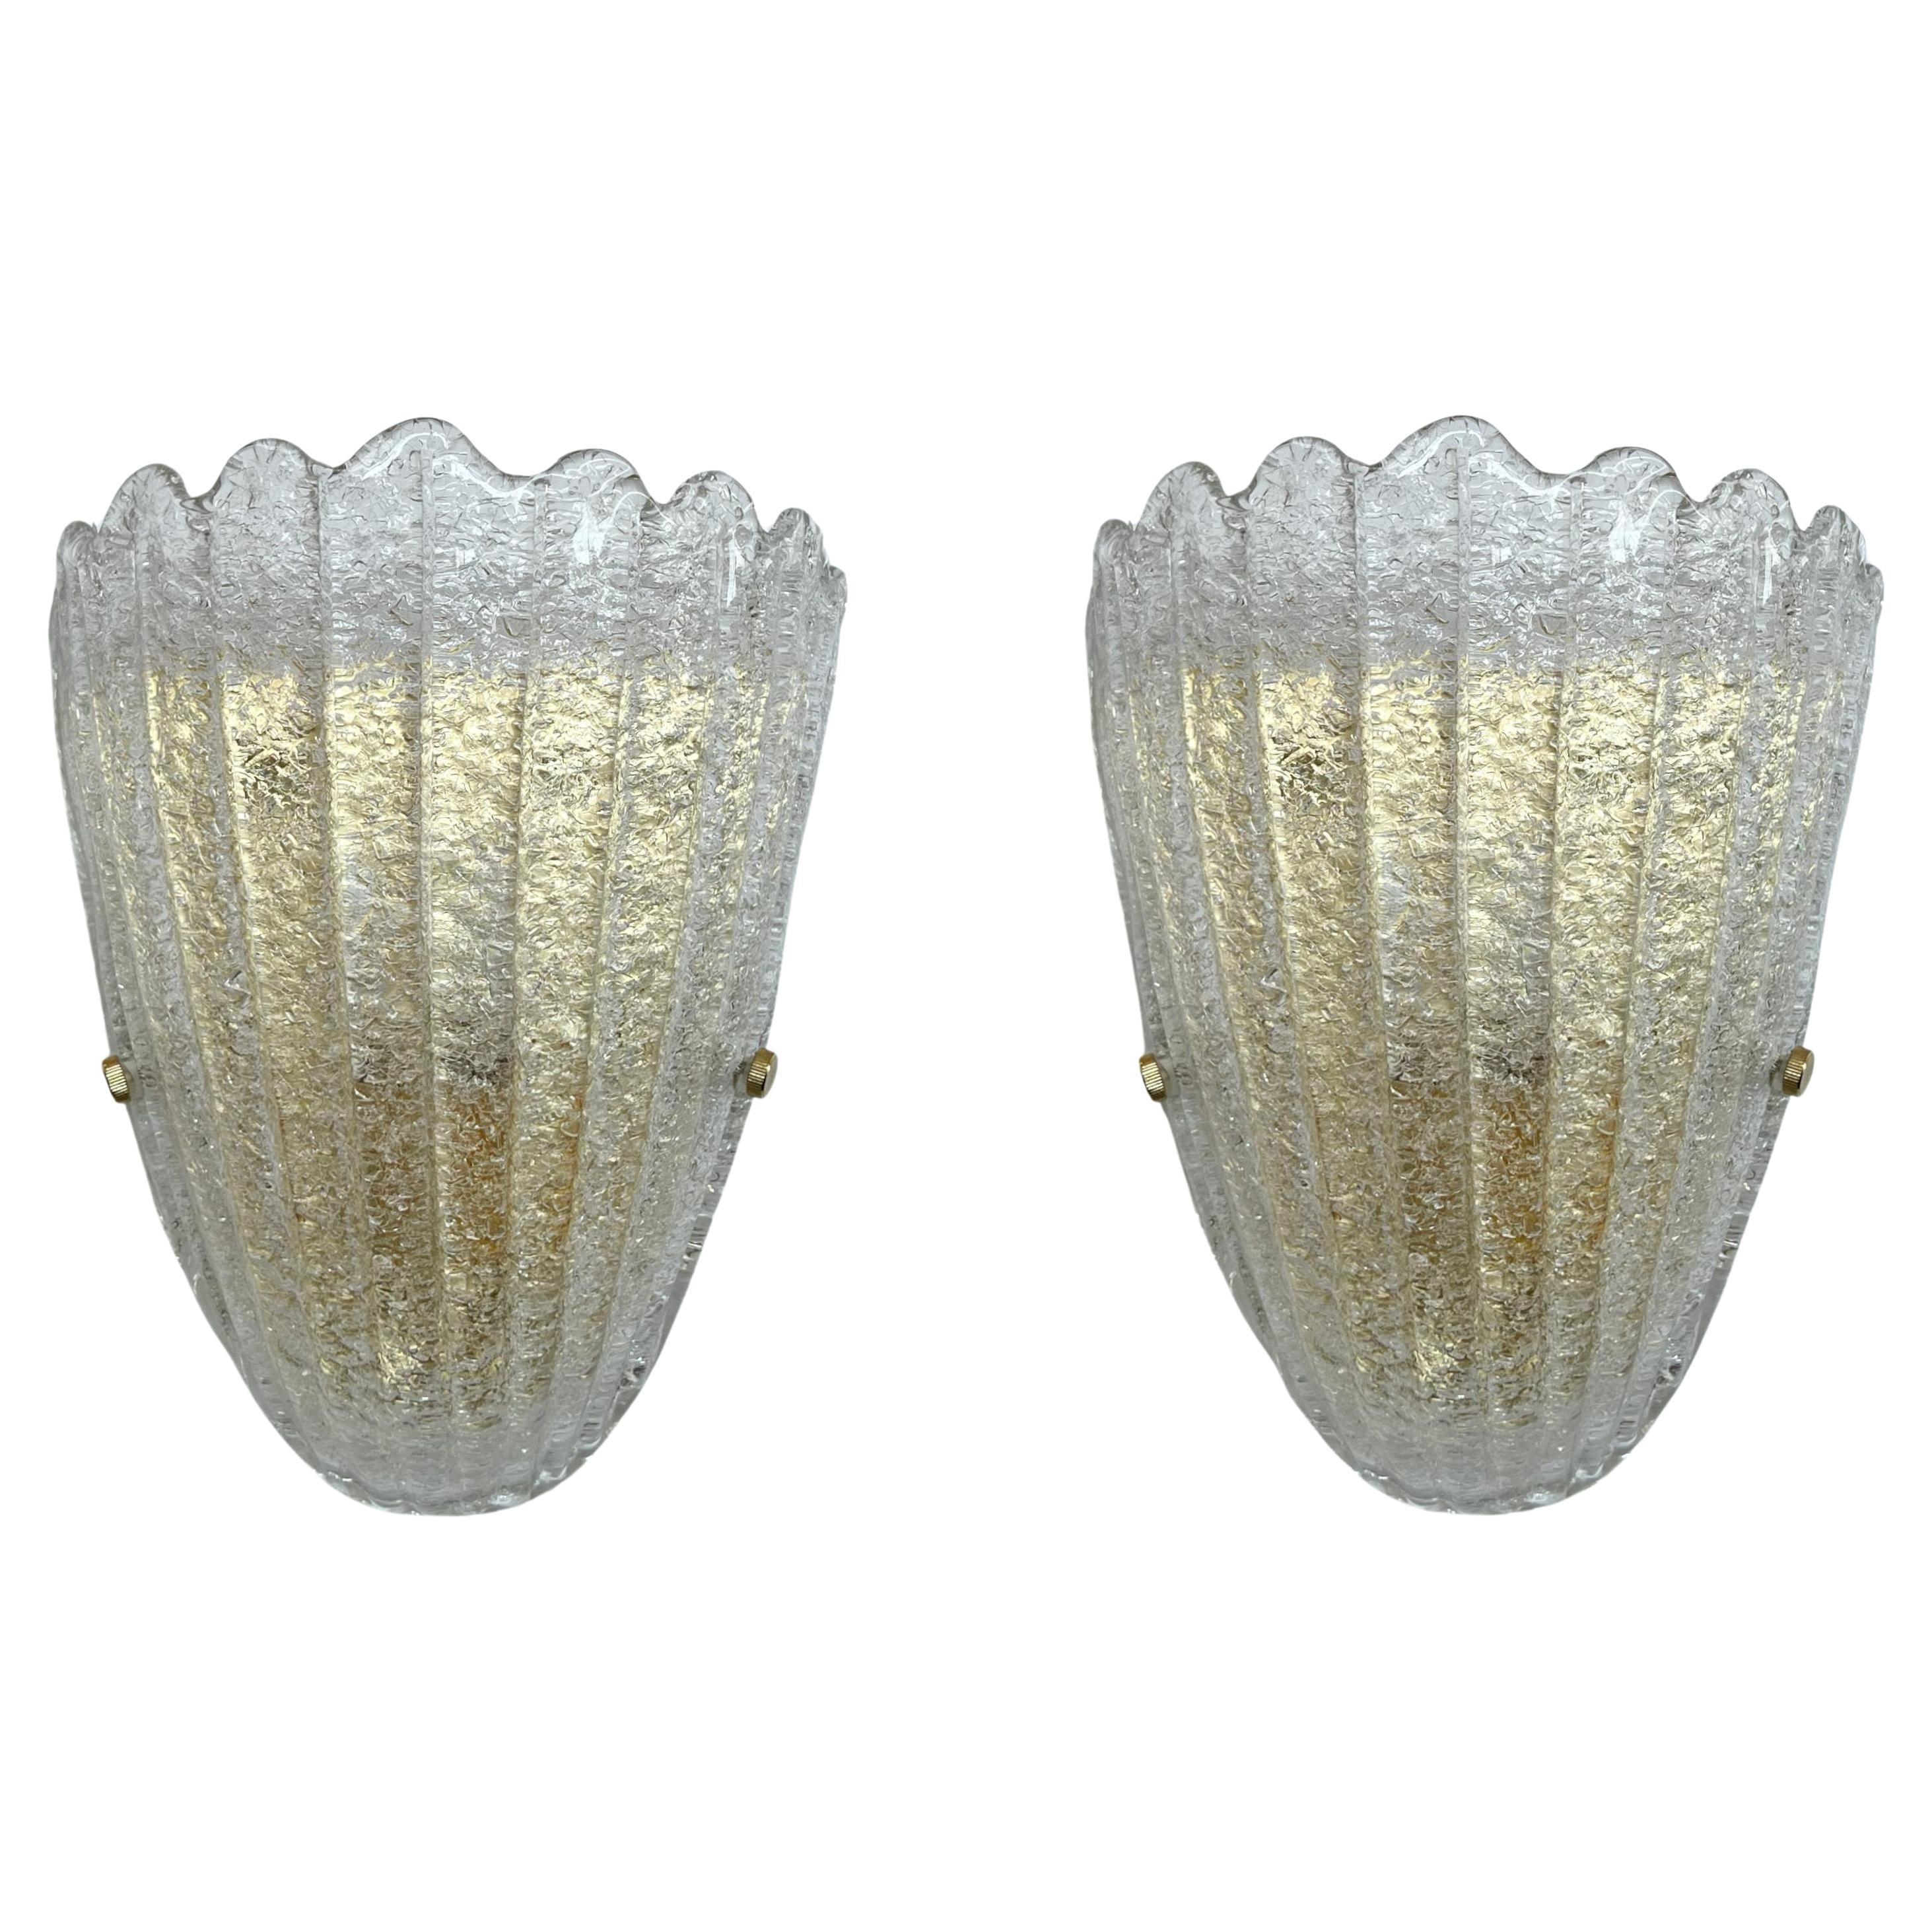 Pair of Graniglia Shield Sconces by Fabio Ltd, 2 Pairs Available For Sale